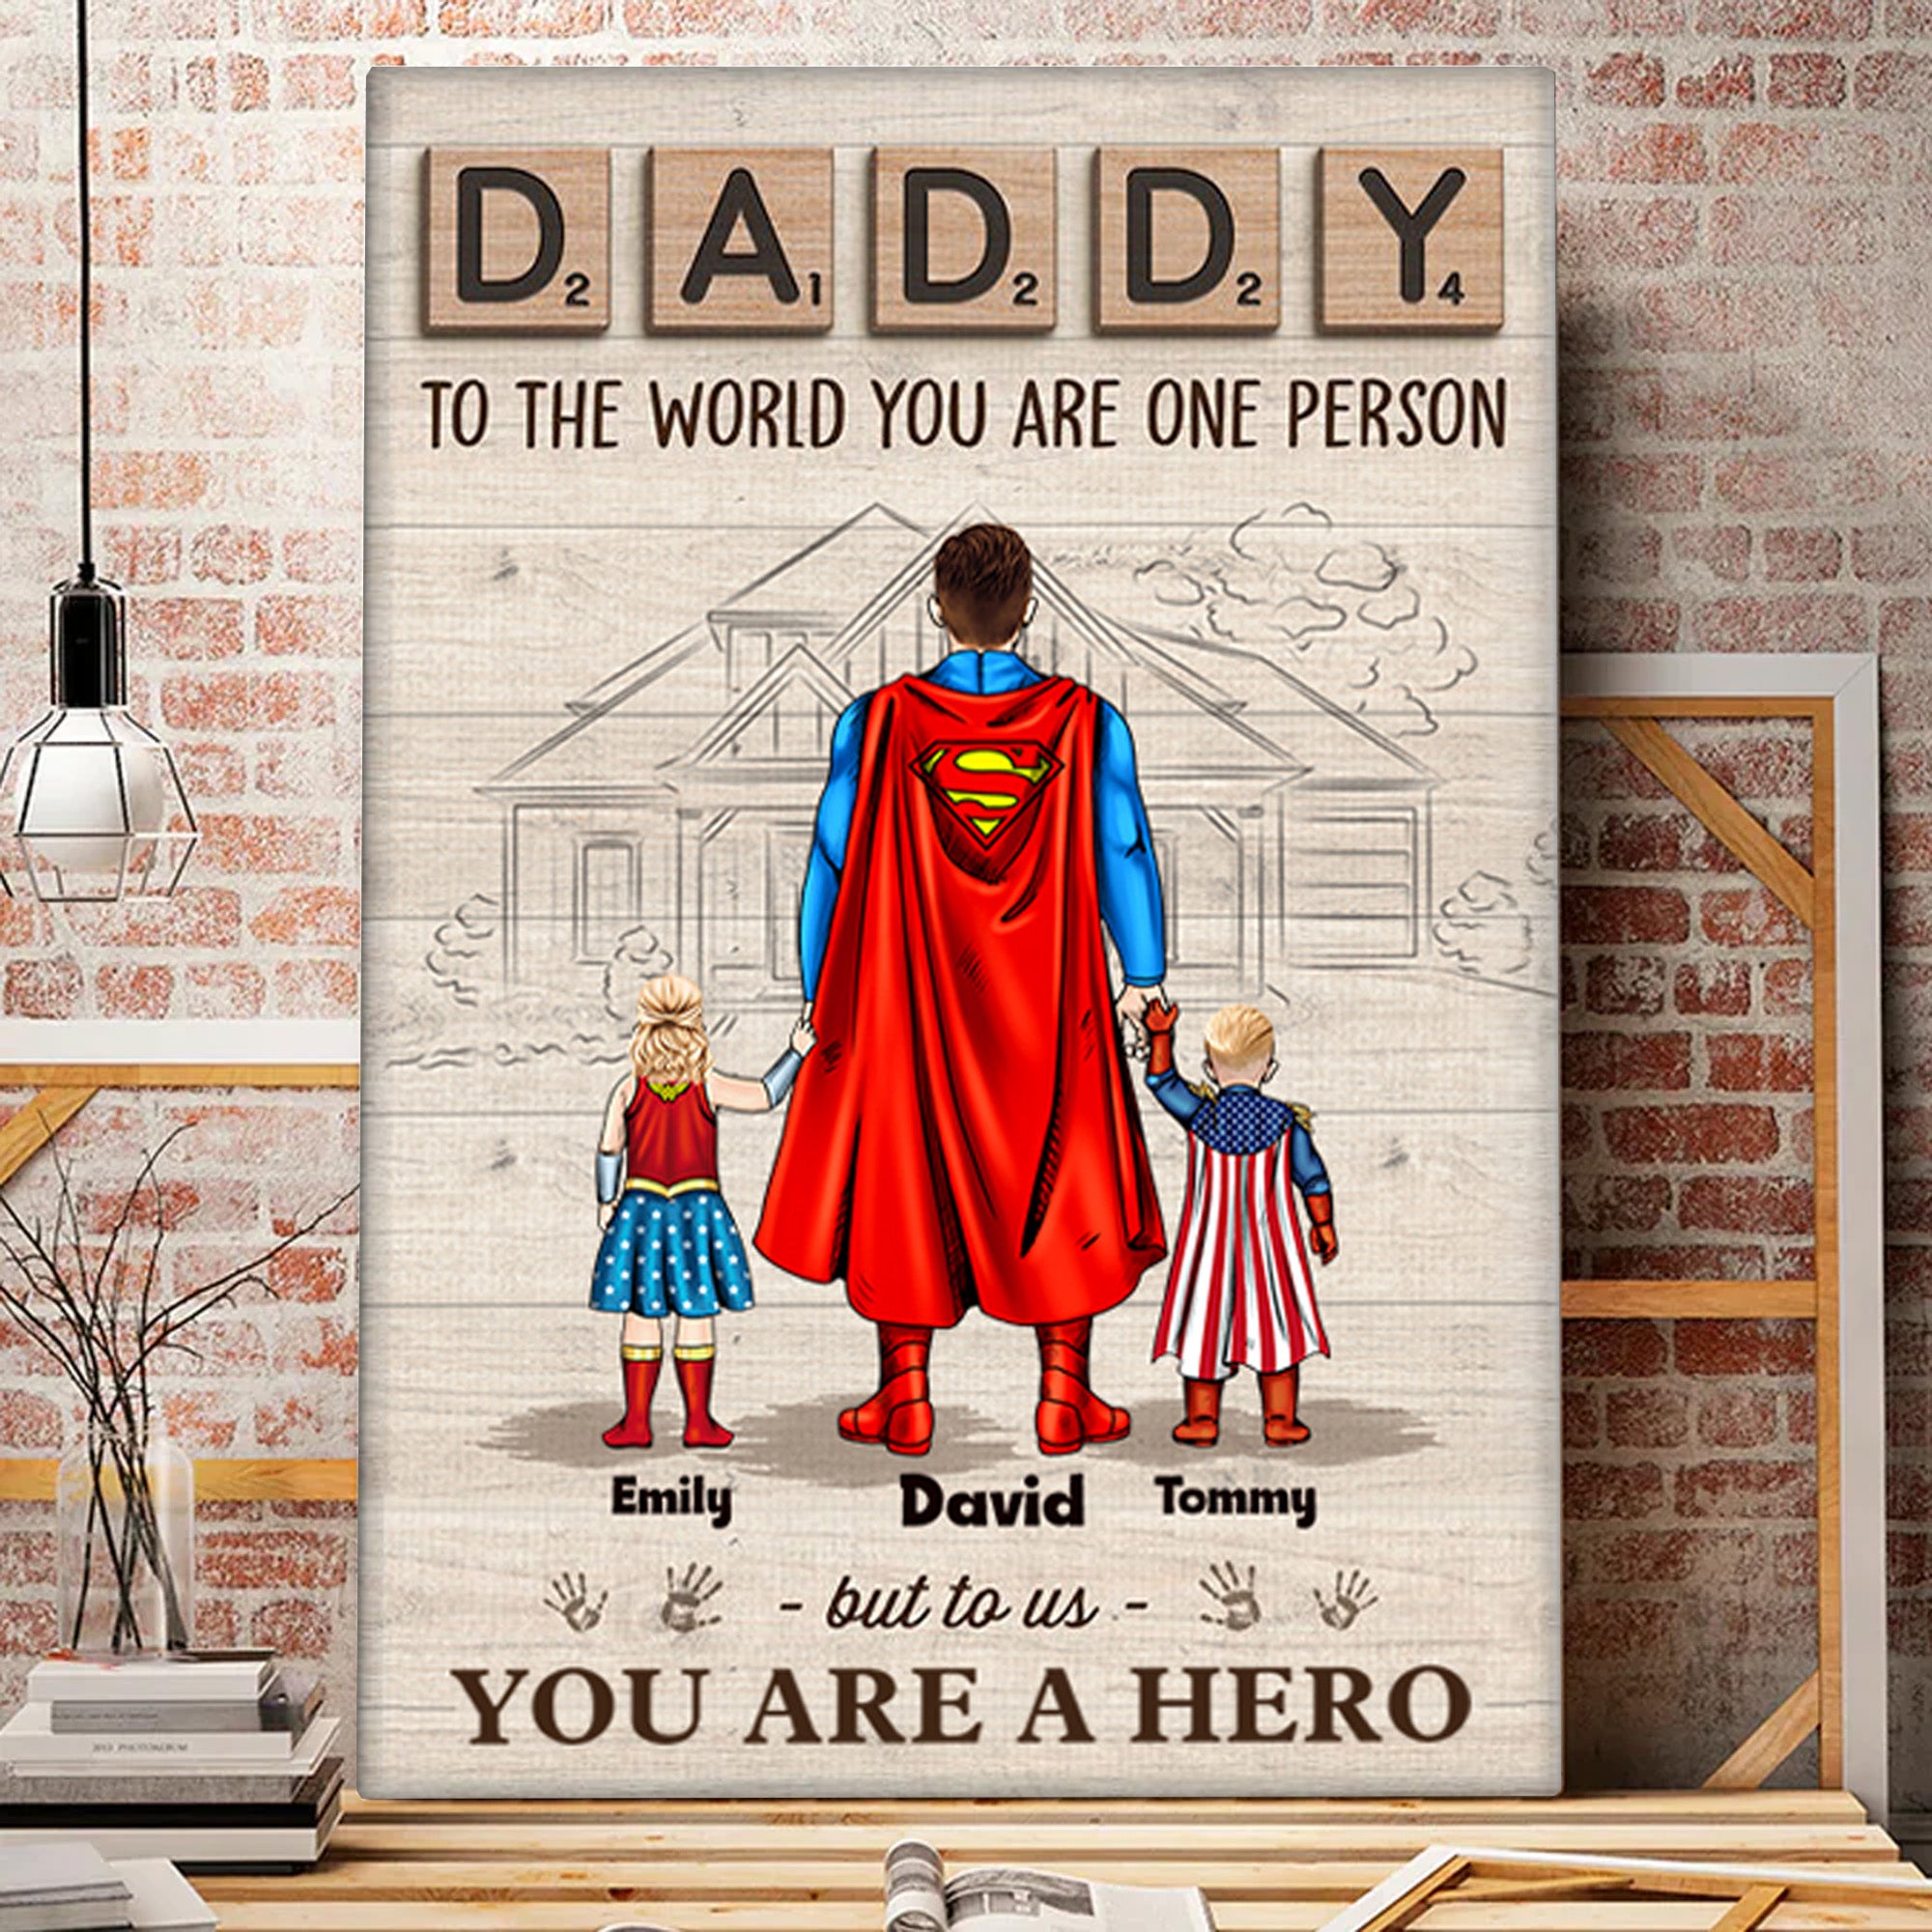 Dad We Love You - Gift For Dad, Grandfather - Personalized Canvas